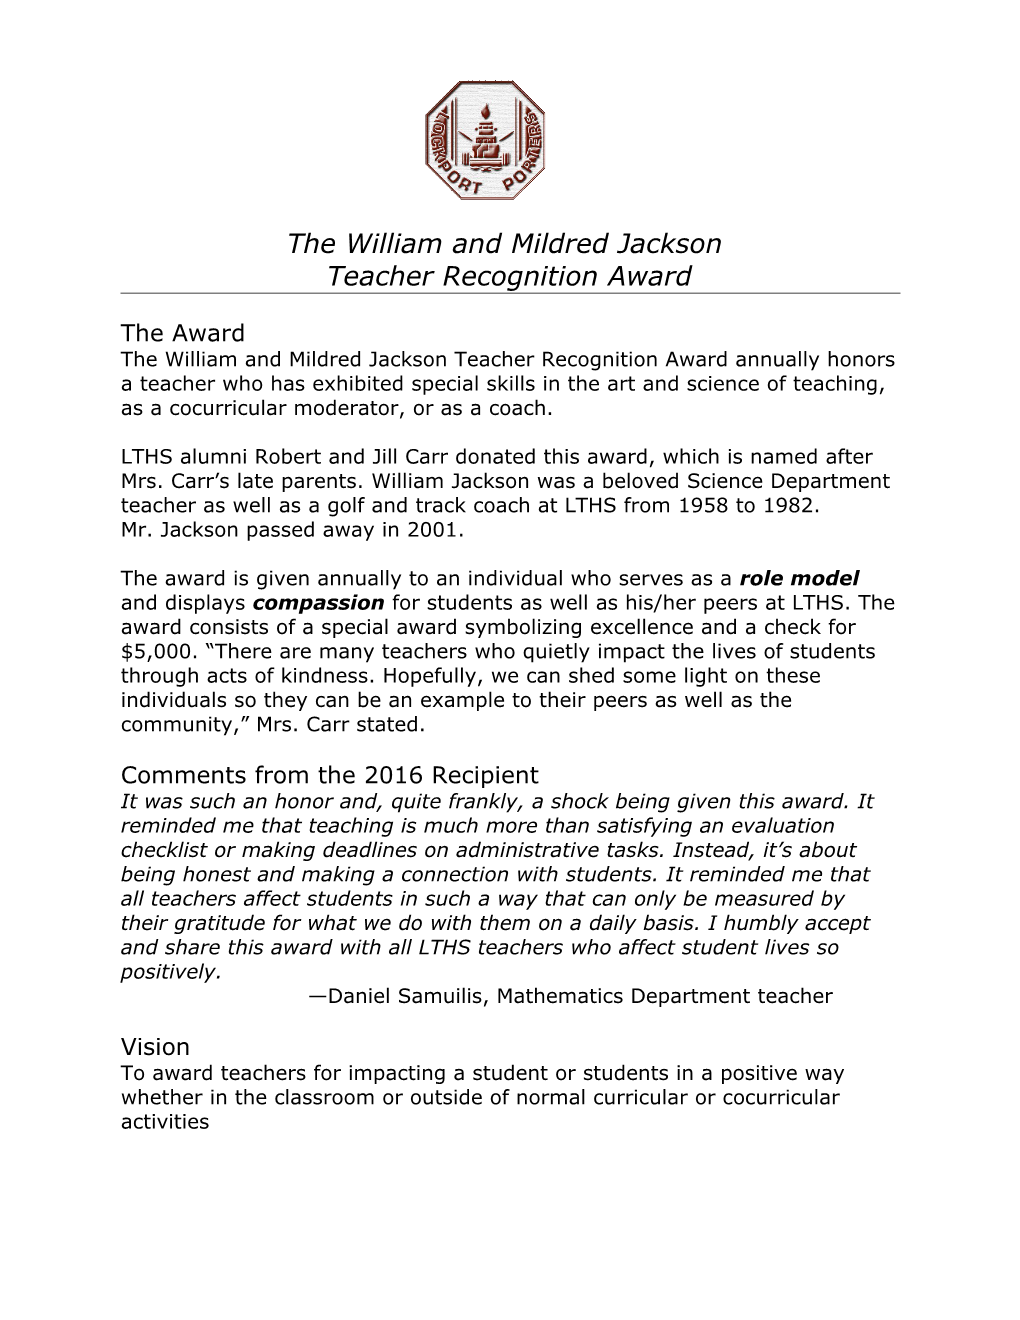 The William and Mildred Jackson Teacher Recognition Award